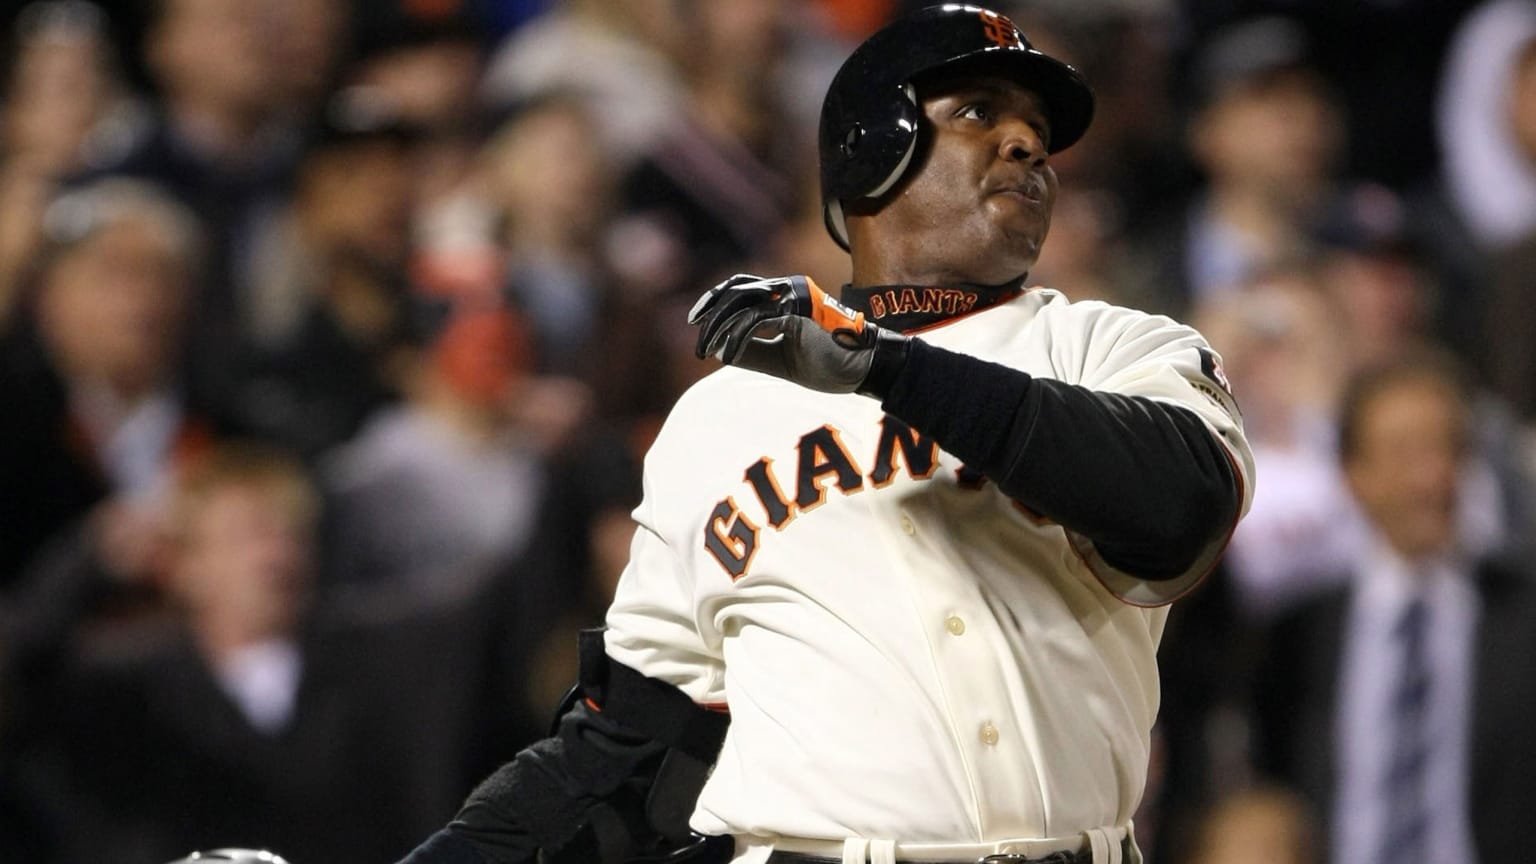 Barry Bonds follows through on a swing with the Giants